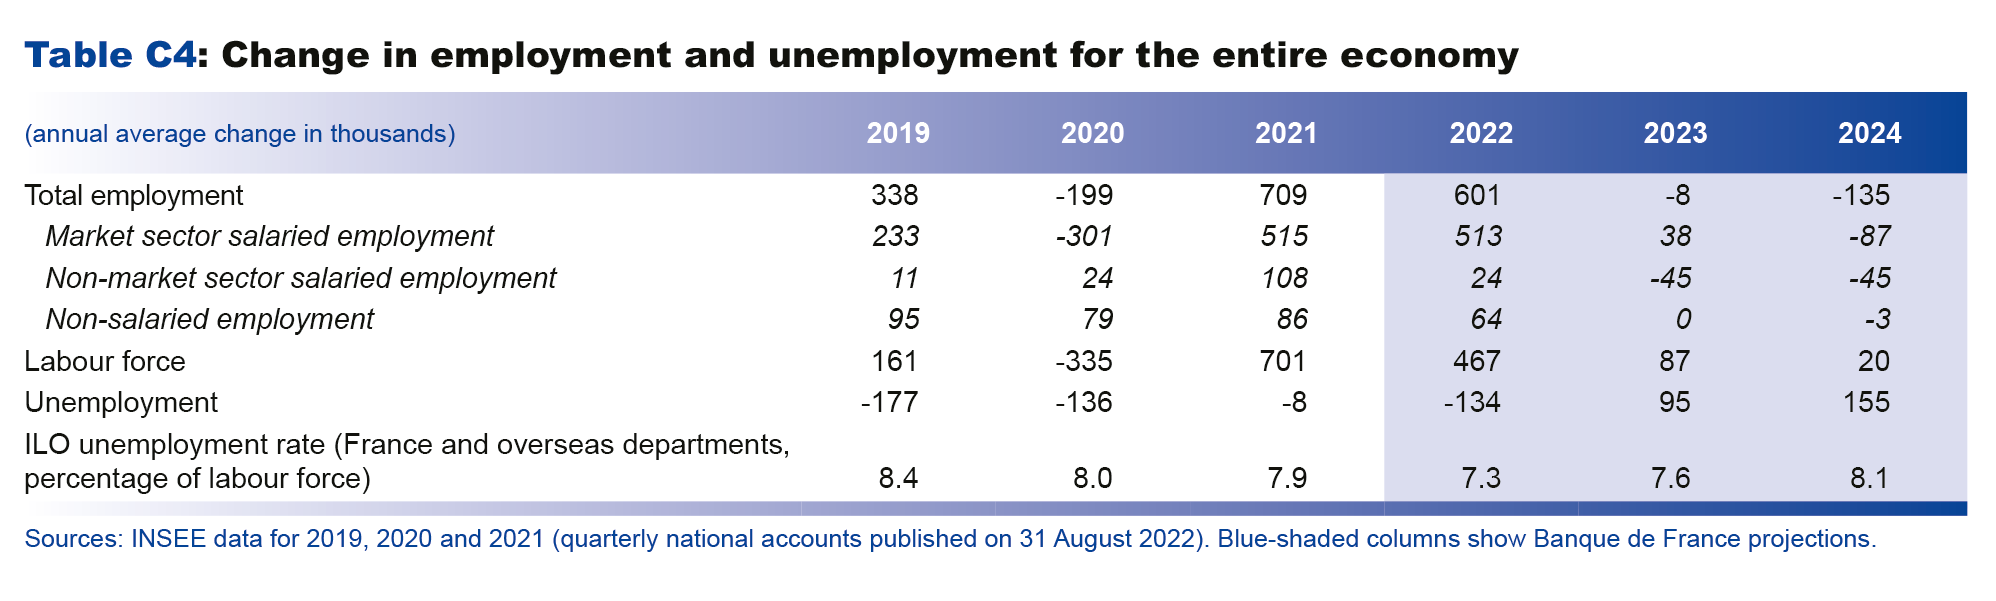 Change in employment and unemployment for the entire economy